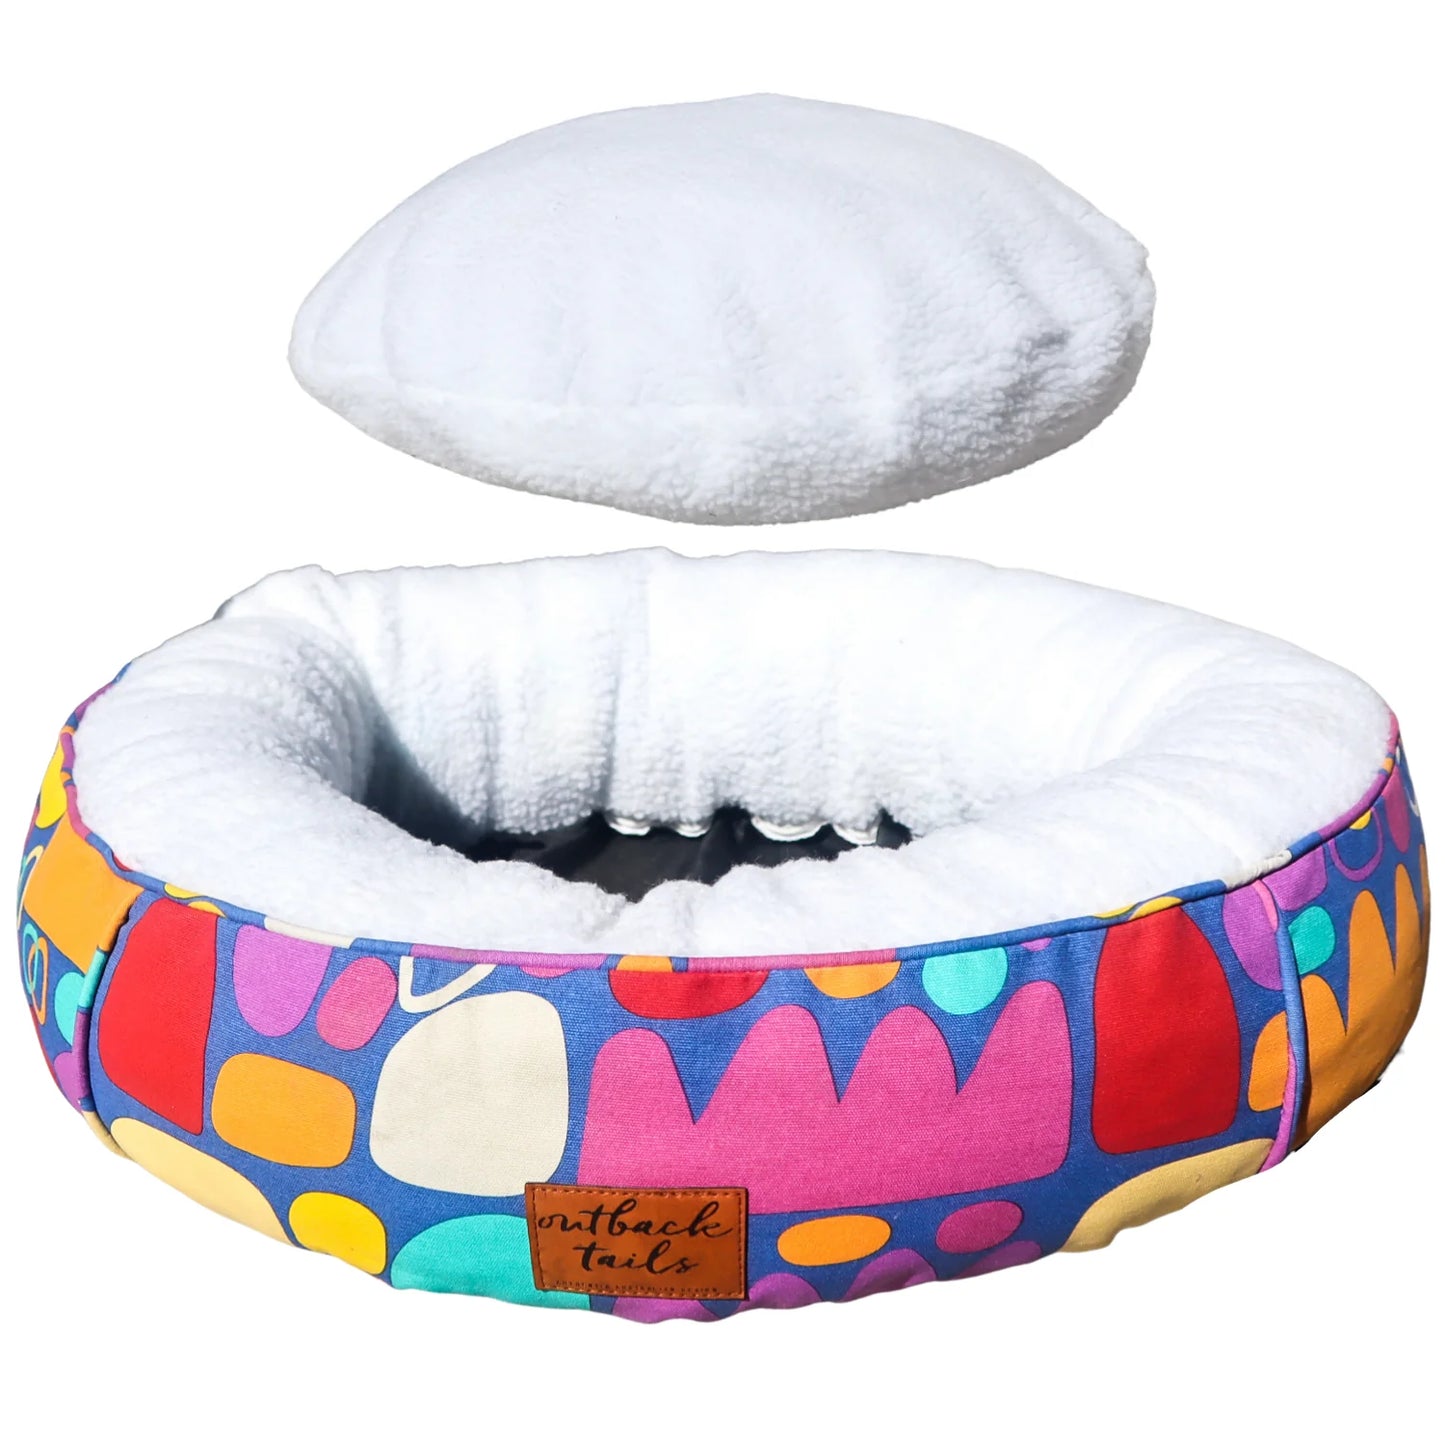 Outback Tails - Fleecy Round Dog Bed - Puli Puli Multi Colour